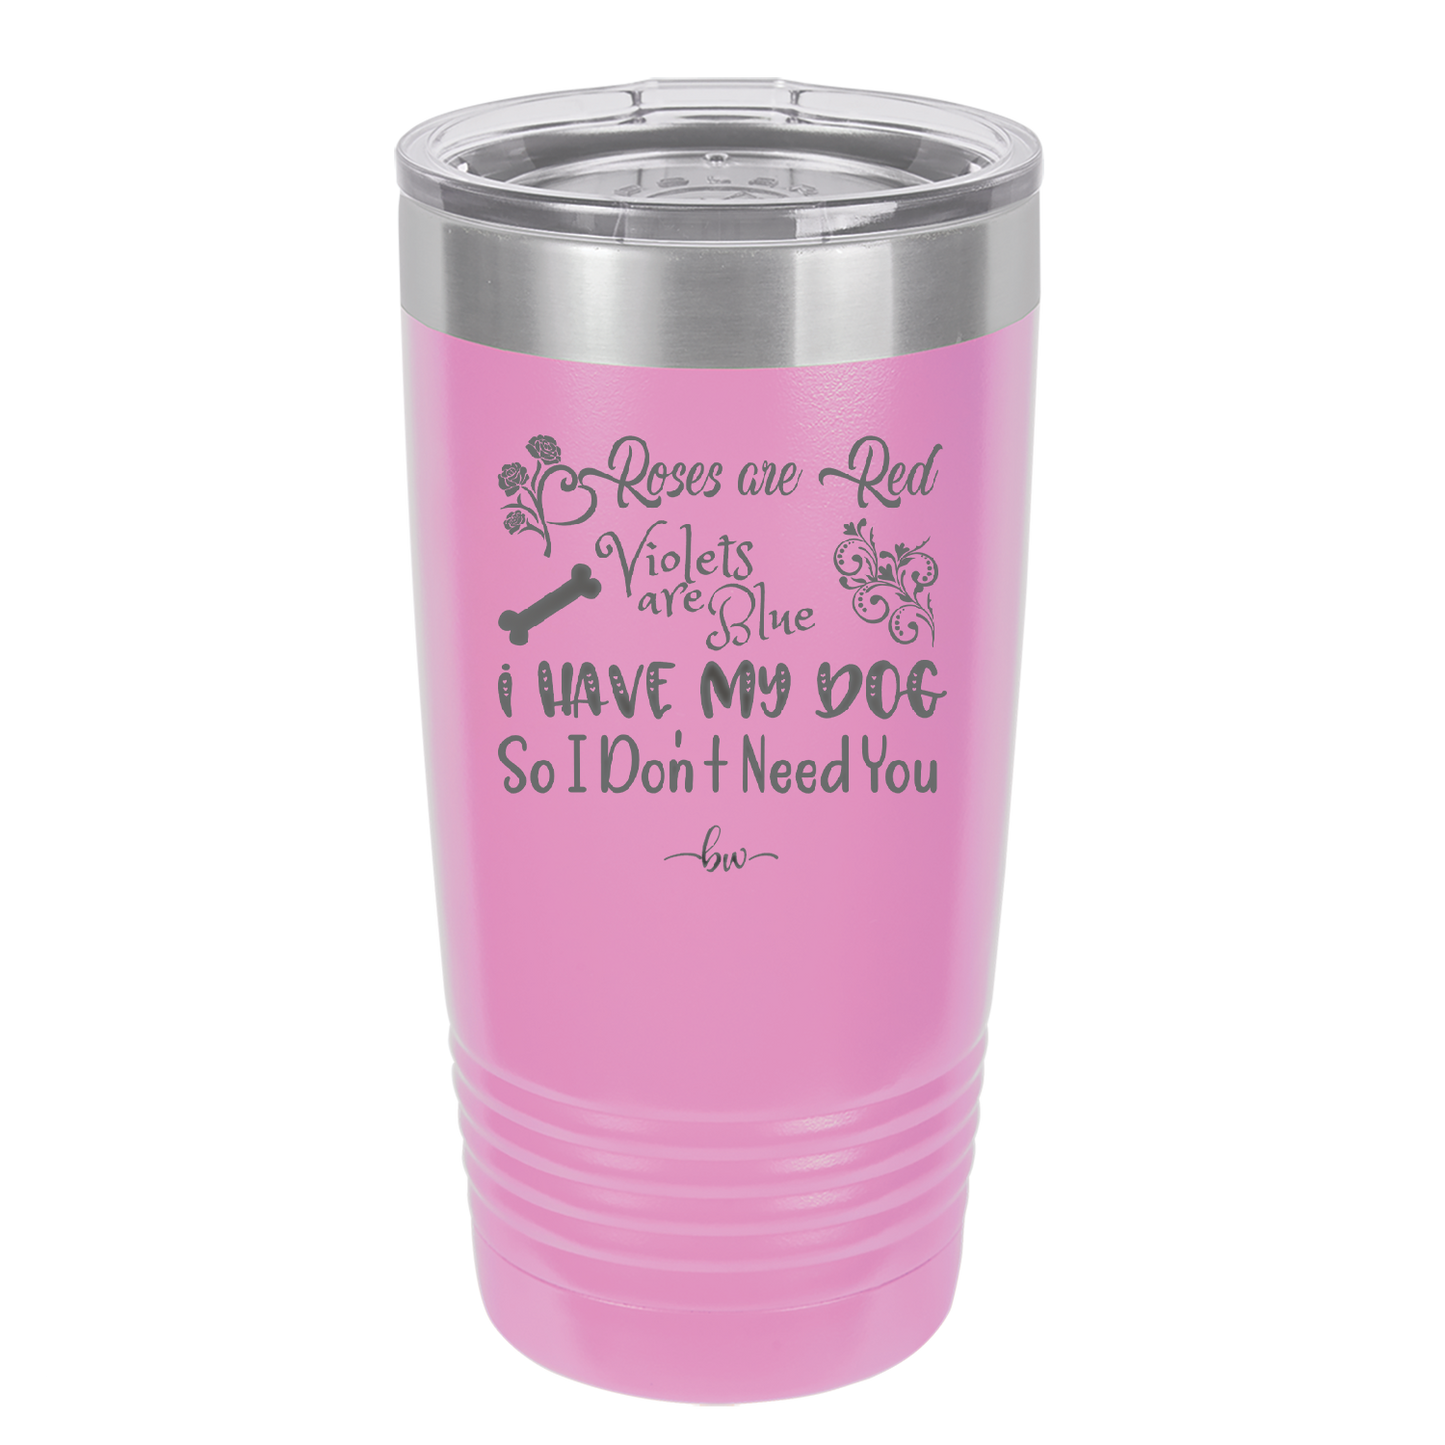 Roses are Red Violets are Blue I Have My Dog so I Don't Need You - Laser Engraved Stainless Steel Drinkware - 1752 -